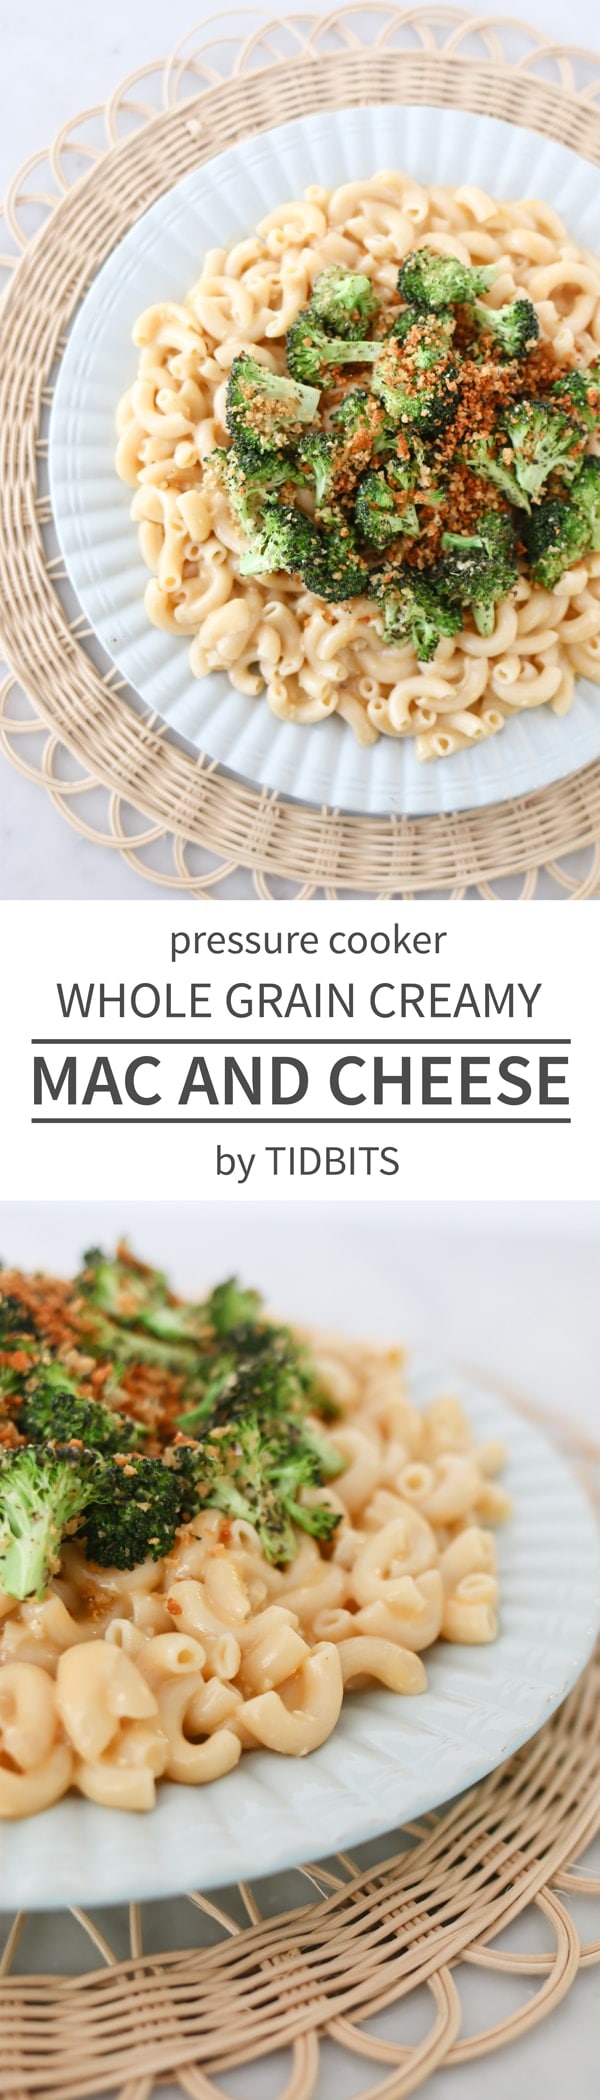 Whole Grain Creamy Mac and Cheese made in minutes in your handy dandy Electric Pressure Cooker (aka Instant Pot, Fagor Lux Multicooker, etc). Top it off with a pile of Parmesan and Panko Roasted Broccoli and this is a meal you can feel good about everyday of the week.